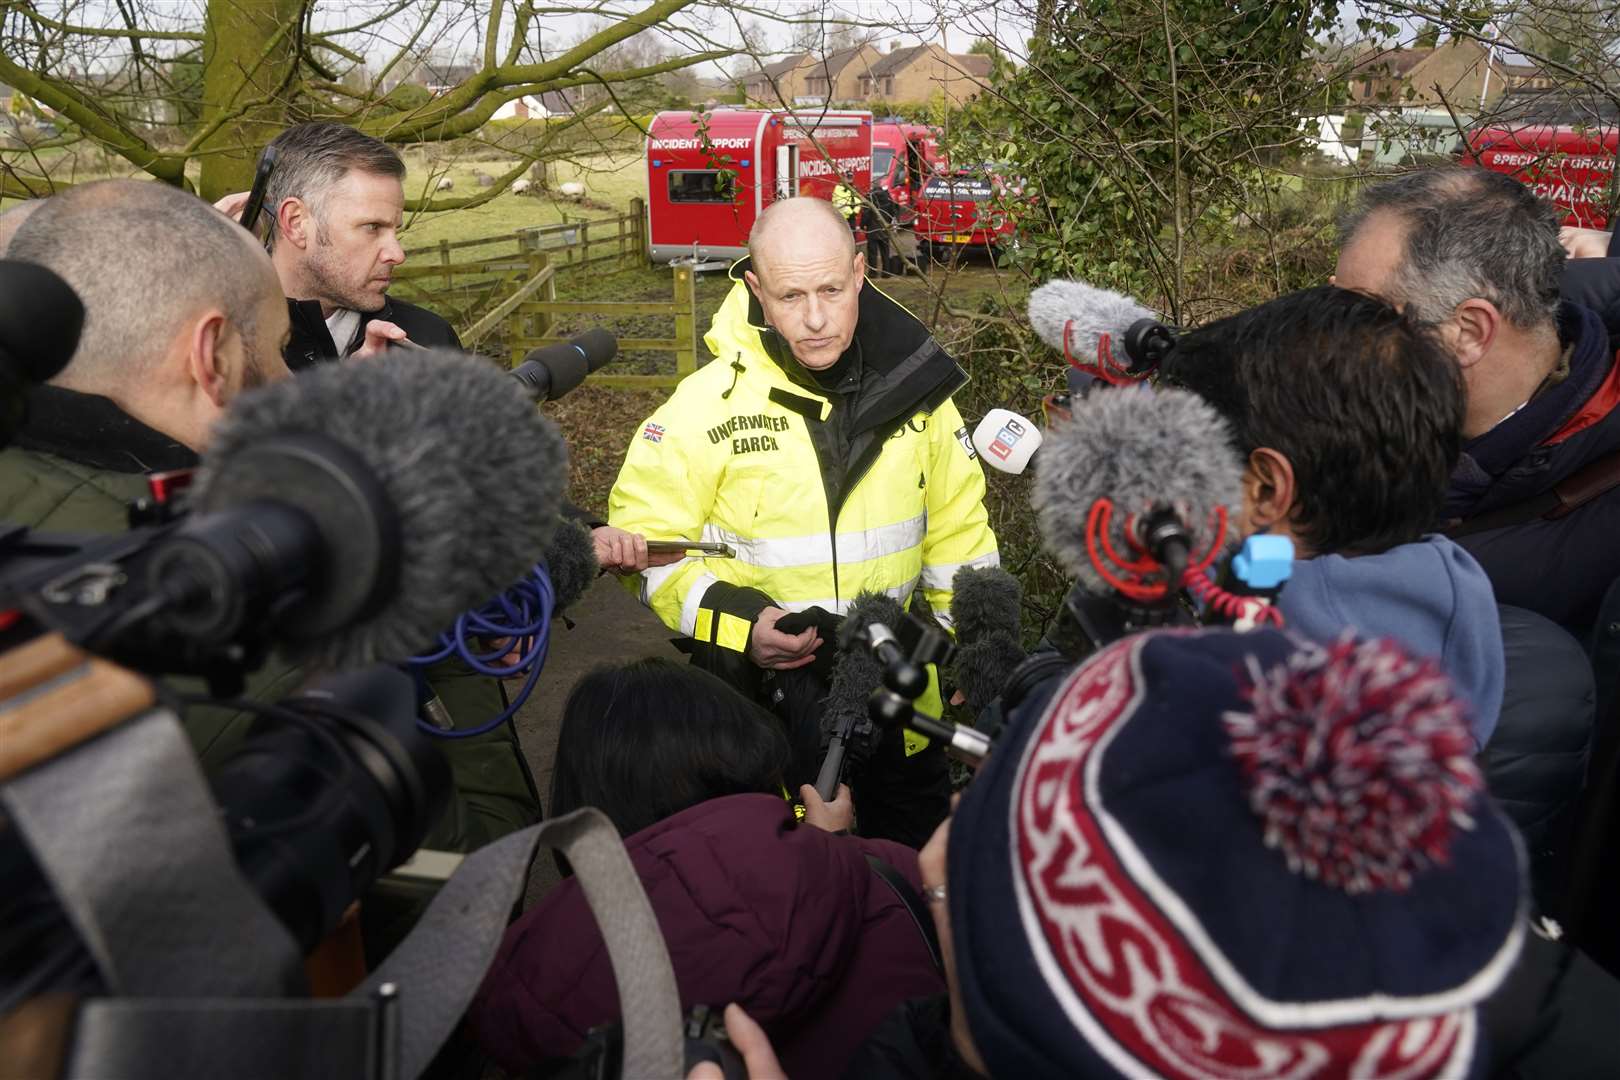 Peter Faulding (centre) of private underwater search and recovery company Specialist Group International (SGI), speaks to the media (Danny Lawson/PA)